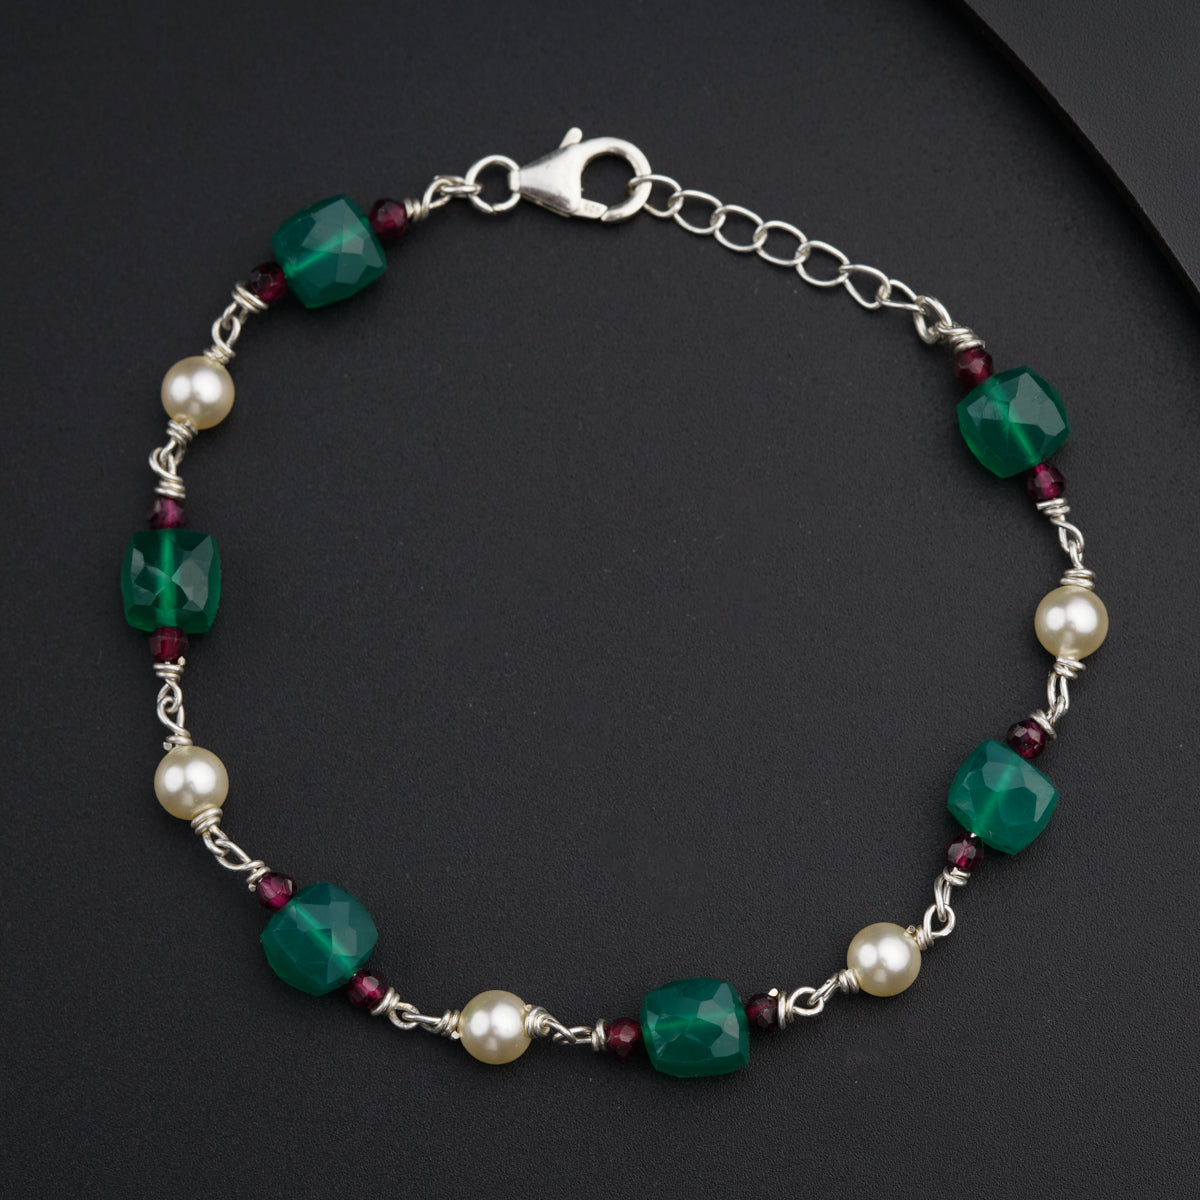 Lot - Sterling Silver bracelet with silver and semi precious stones in  Amber, Yellow, Dark Green and Clear Stones. Made in Italy Approx. L:19cm